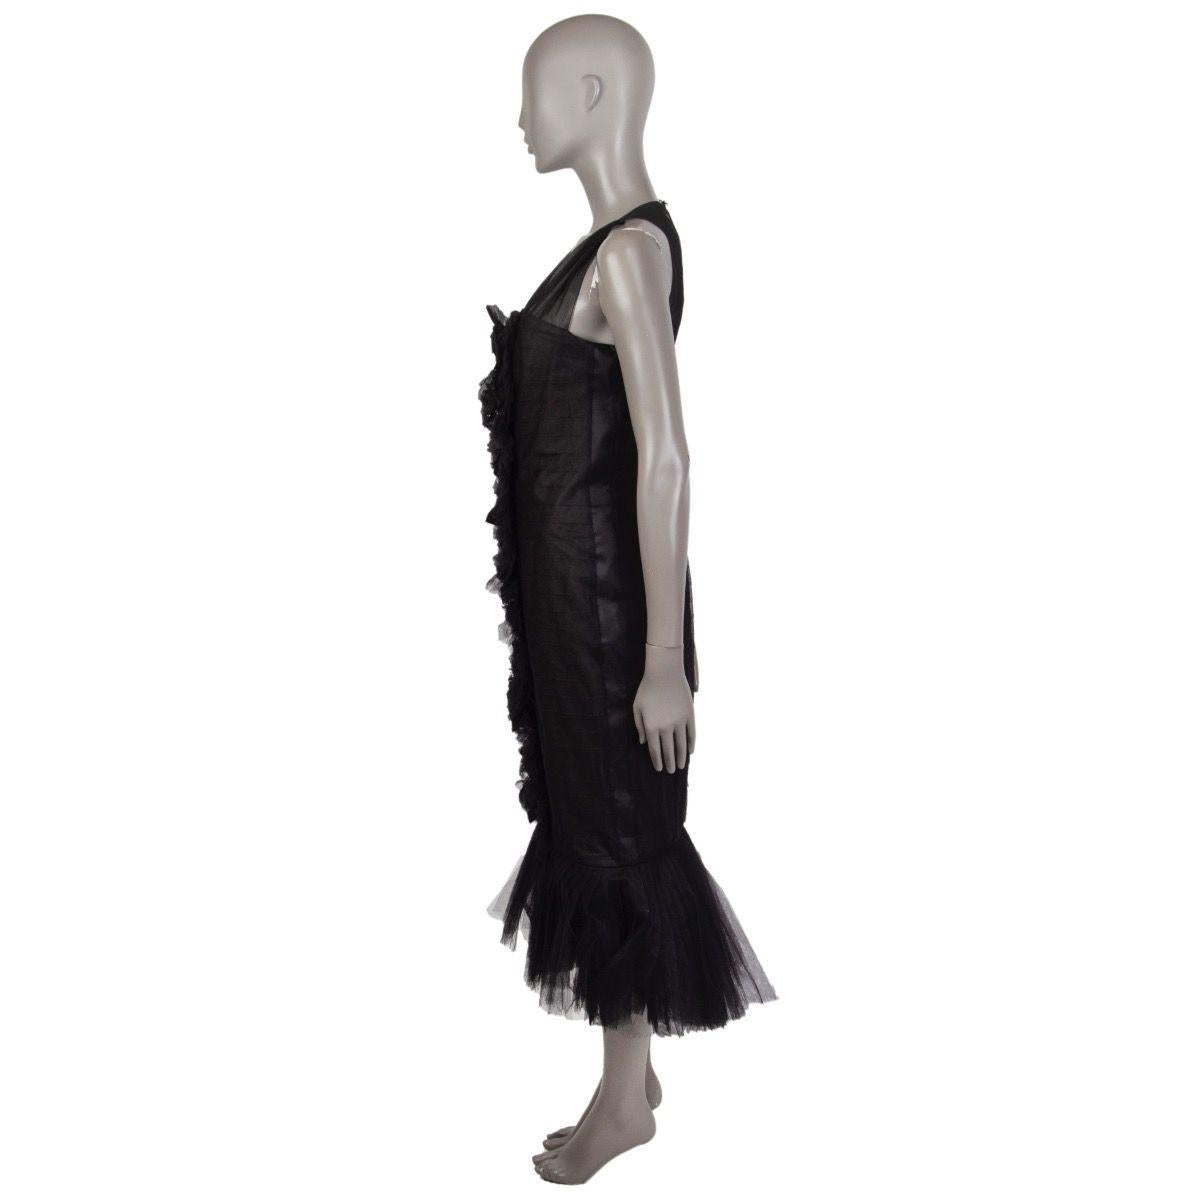 Chanel Trumpet dress in black tulle with ruffled panel and embellished flower applications on the front, and keyhole back. Closes with rhinestones button at the back of the neck and hook and invisible zipper on the back. Lined in black organza. Has